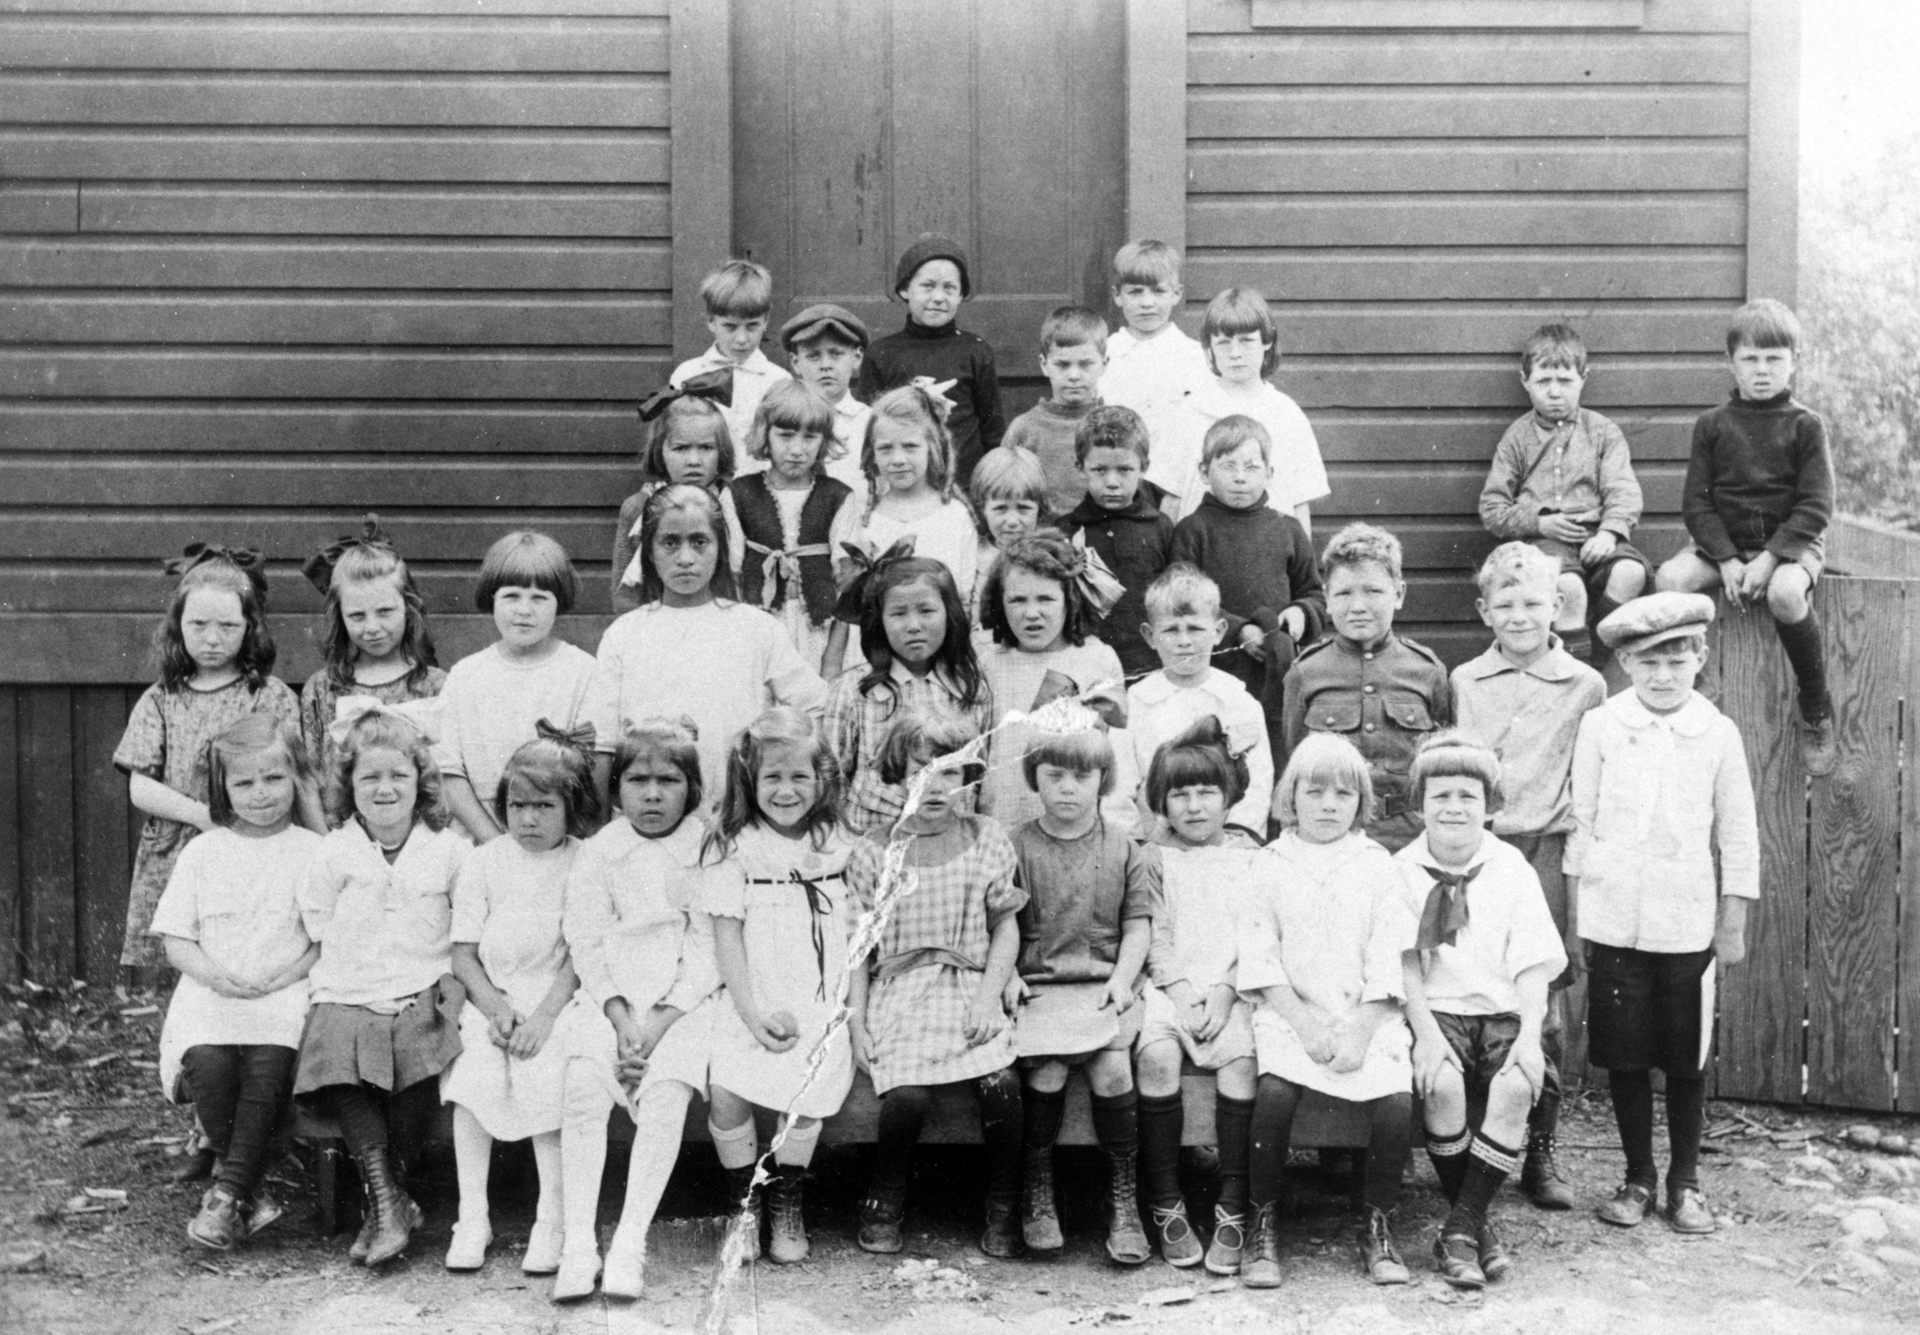 Students at the Capilano public school in North Vancouver, circa 1920s. (Archives of North Vancouver, Image 6490)